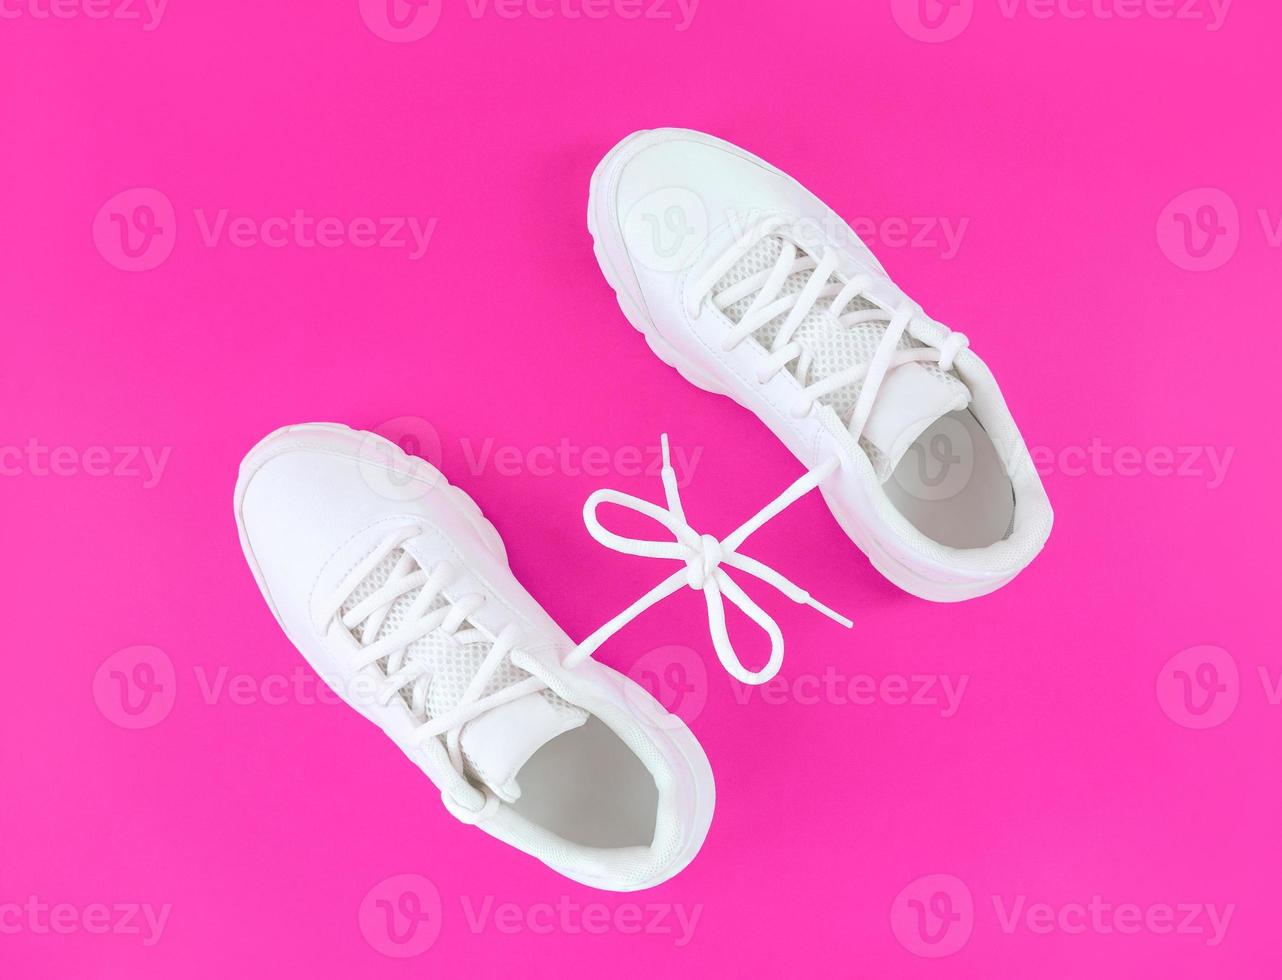 Pair of white sport shoes connected with laces bow on pink background photo